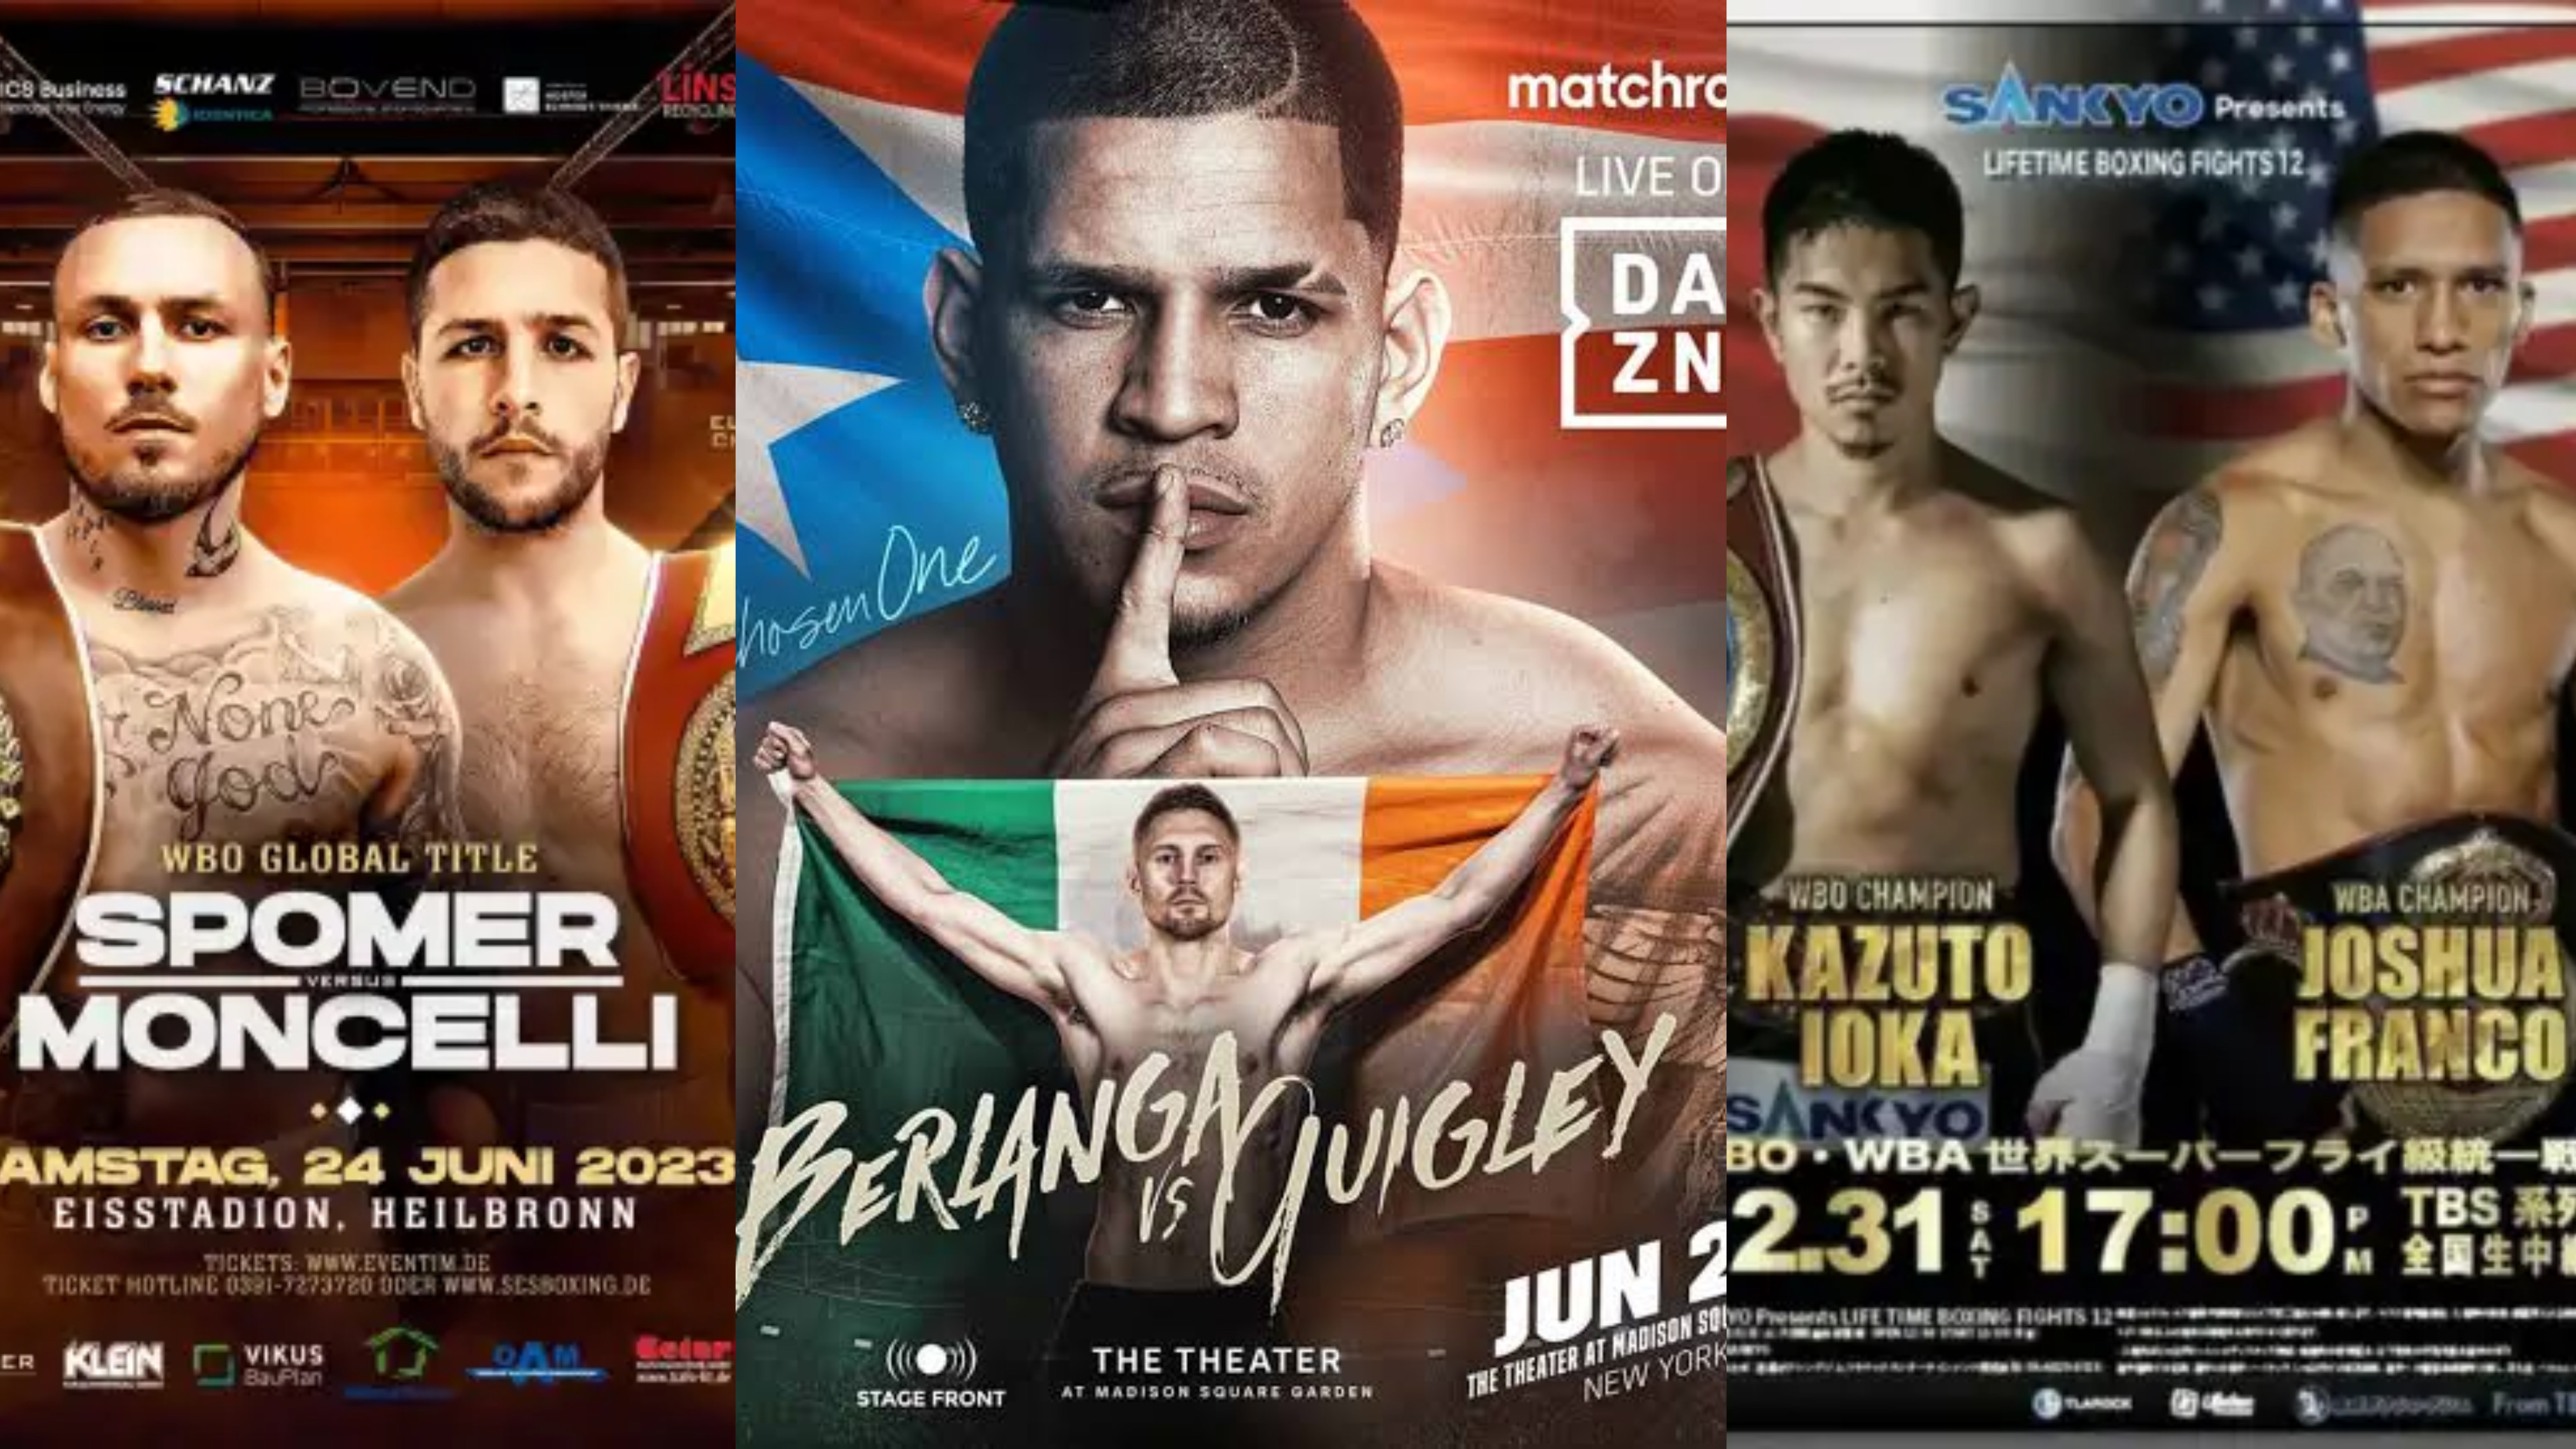 Boxing Tonight Which Boxers Will Fight Tonight on June 24?